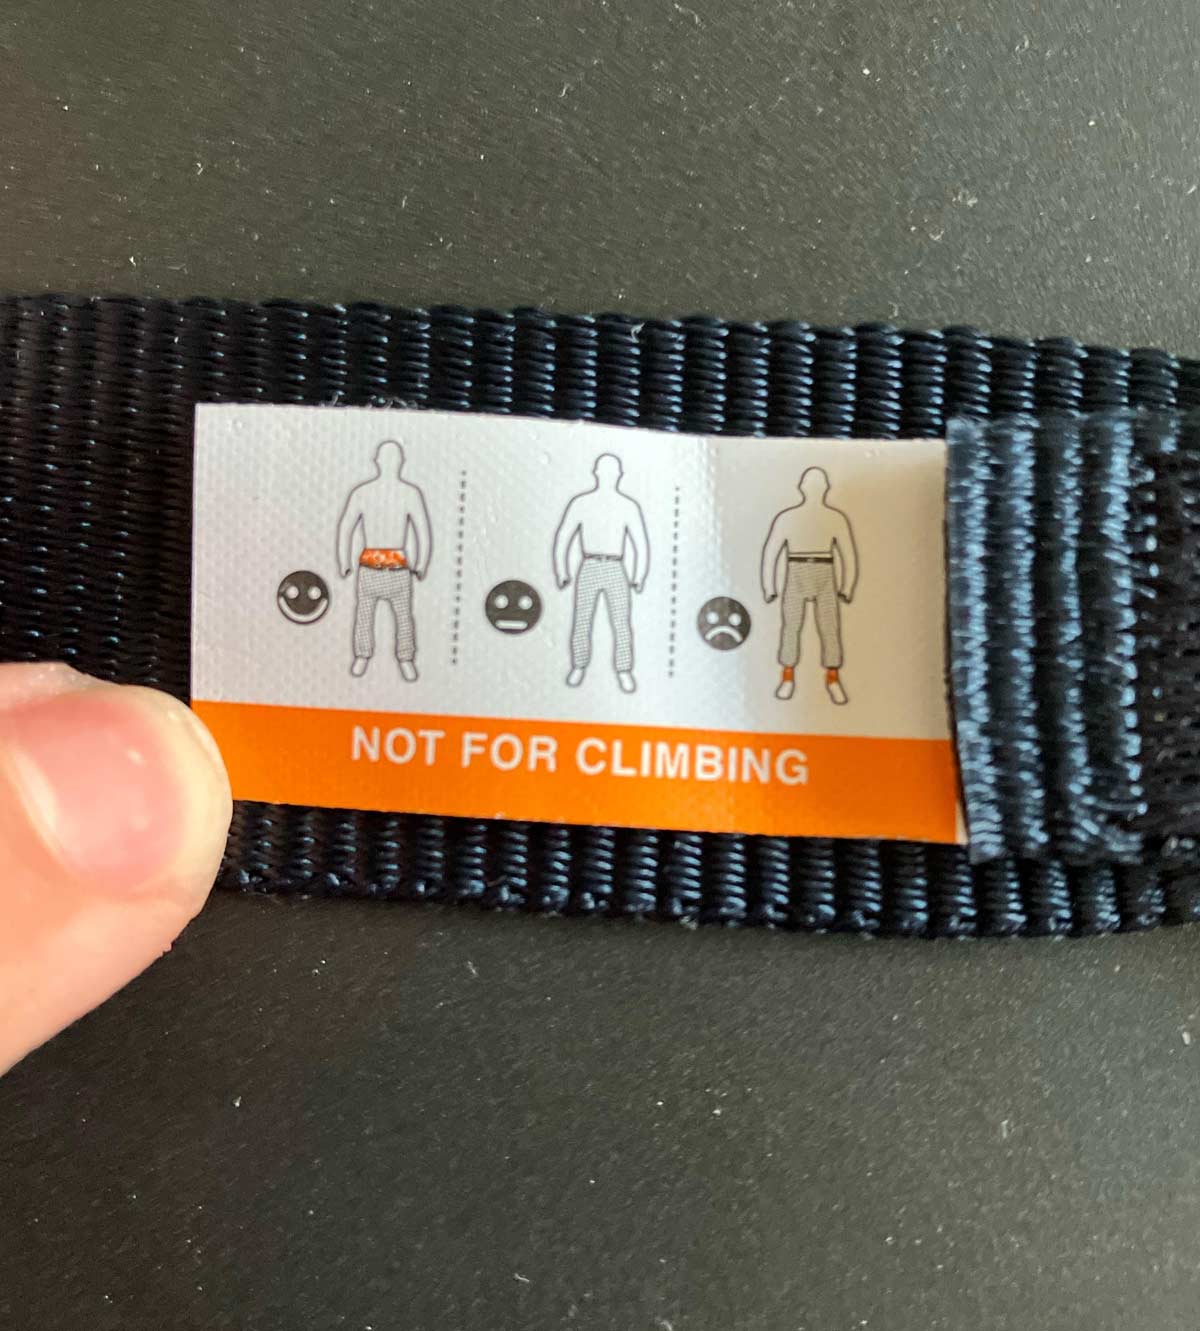 My new belt came with instructions...